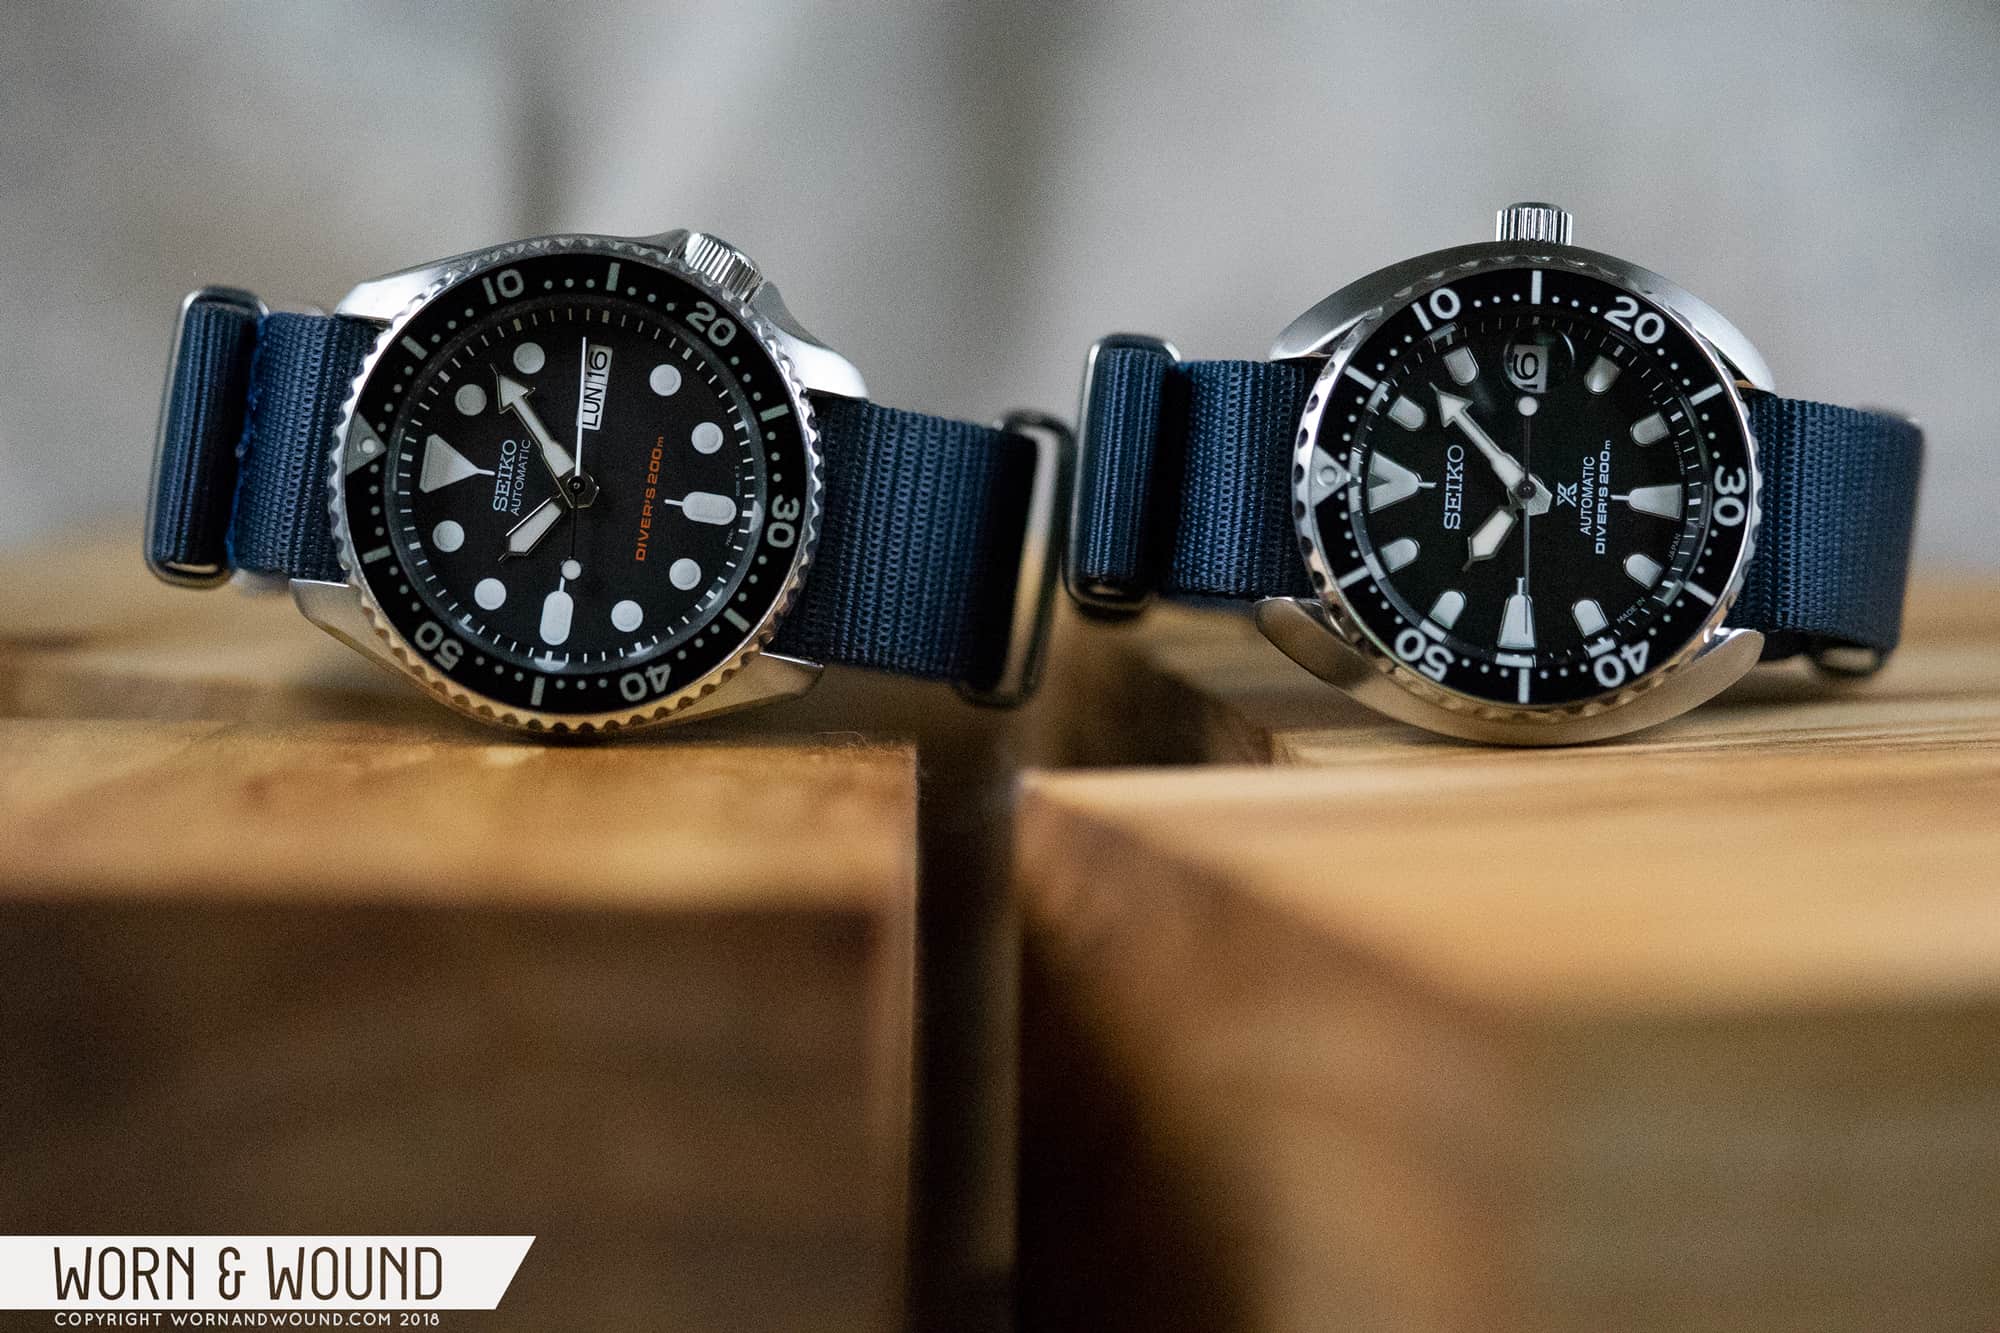 Review: Is the Seiko Mini-Turtle the New SKX007? - Worn & Wound